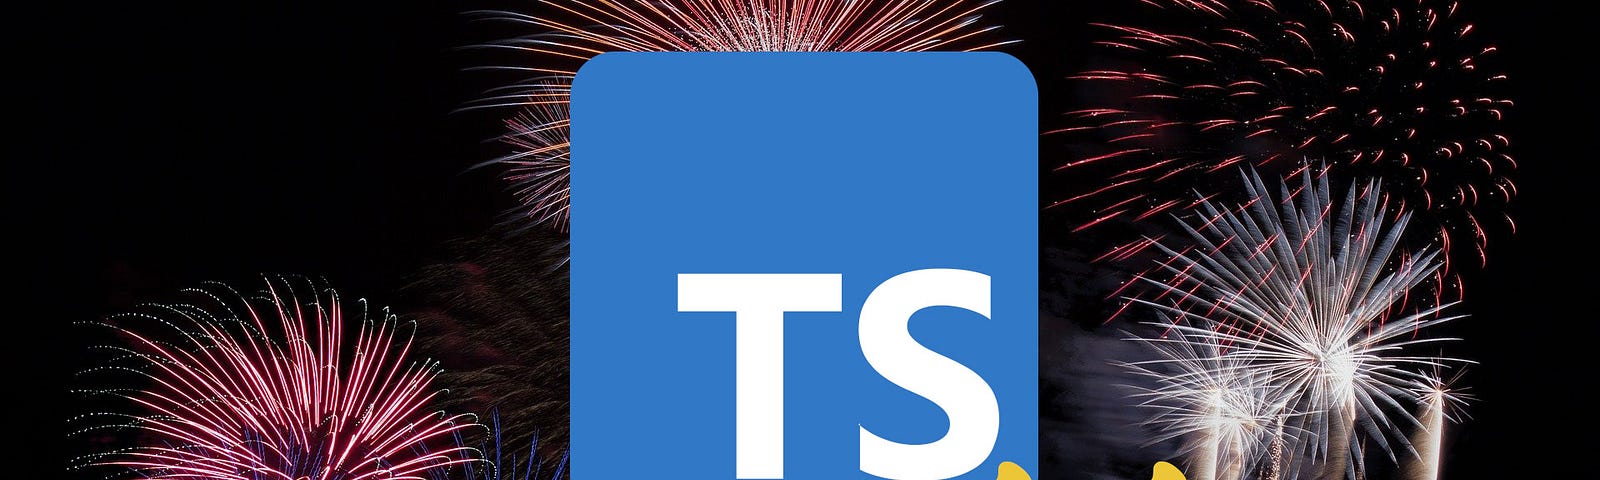 Fireworks and TypeScript version 4.4